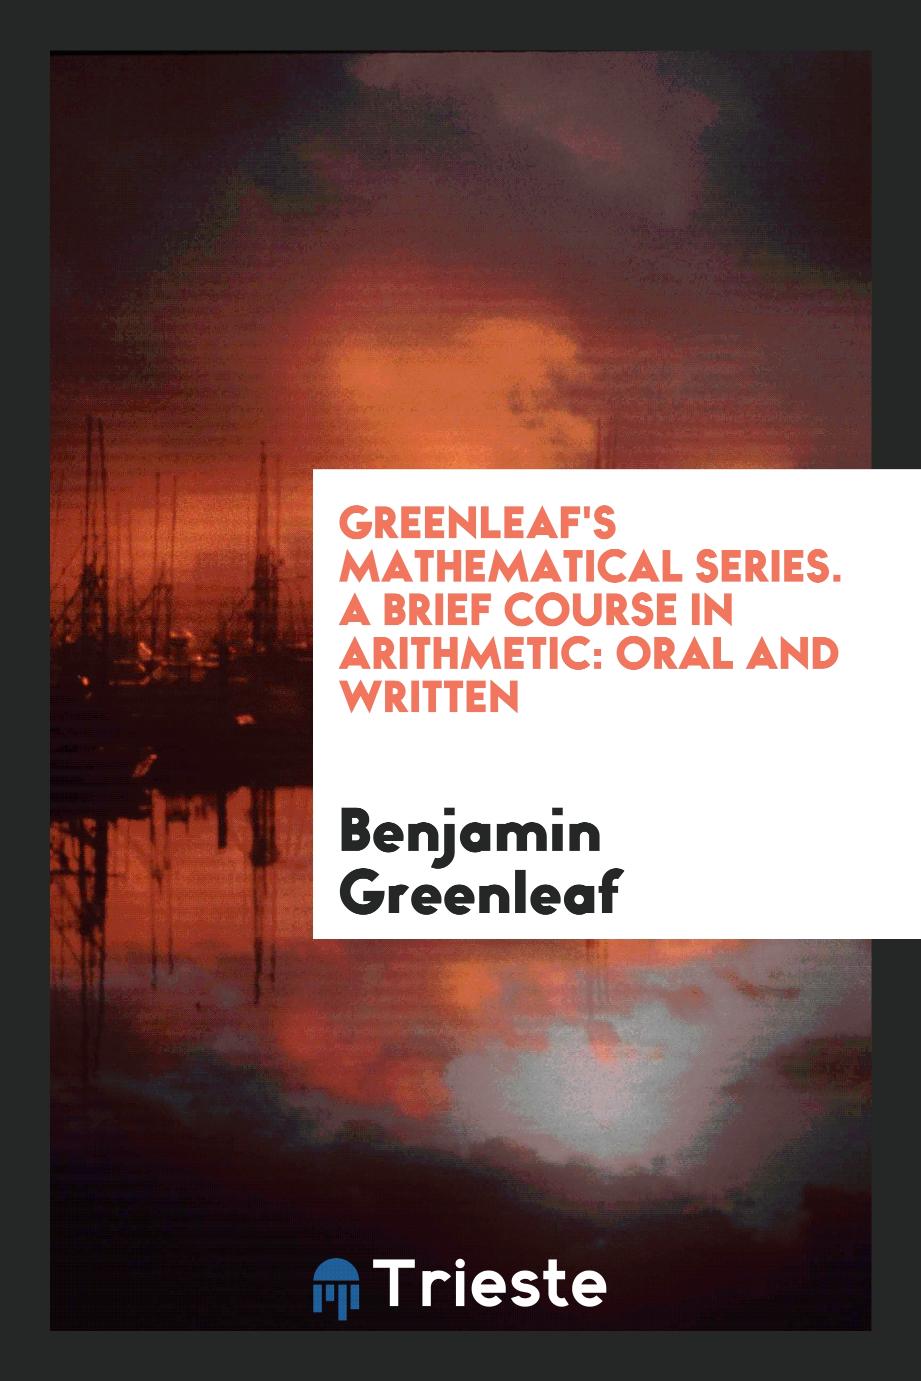 Greenleaf's Mathematical Series. A Brief Course in Arithmetic: Oral and Written